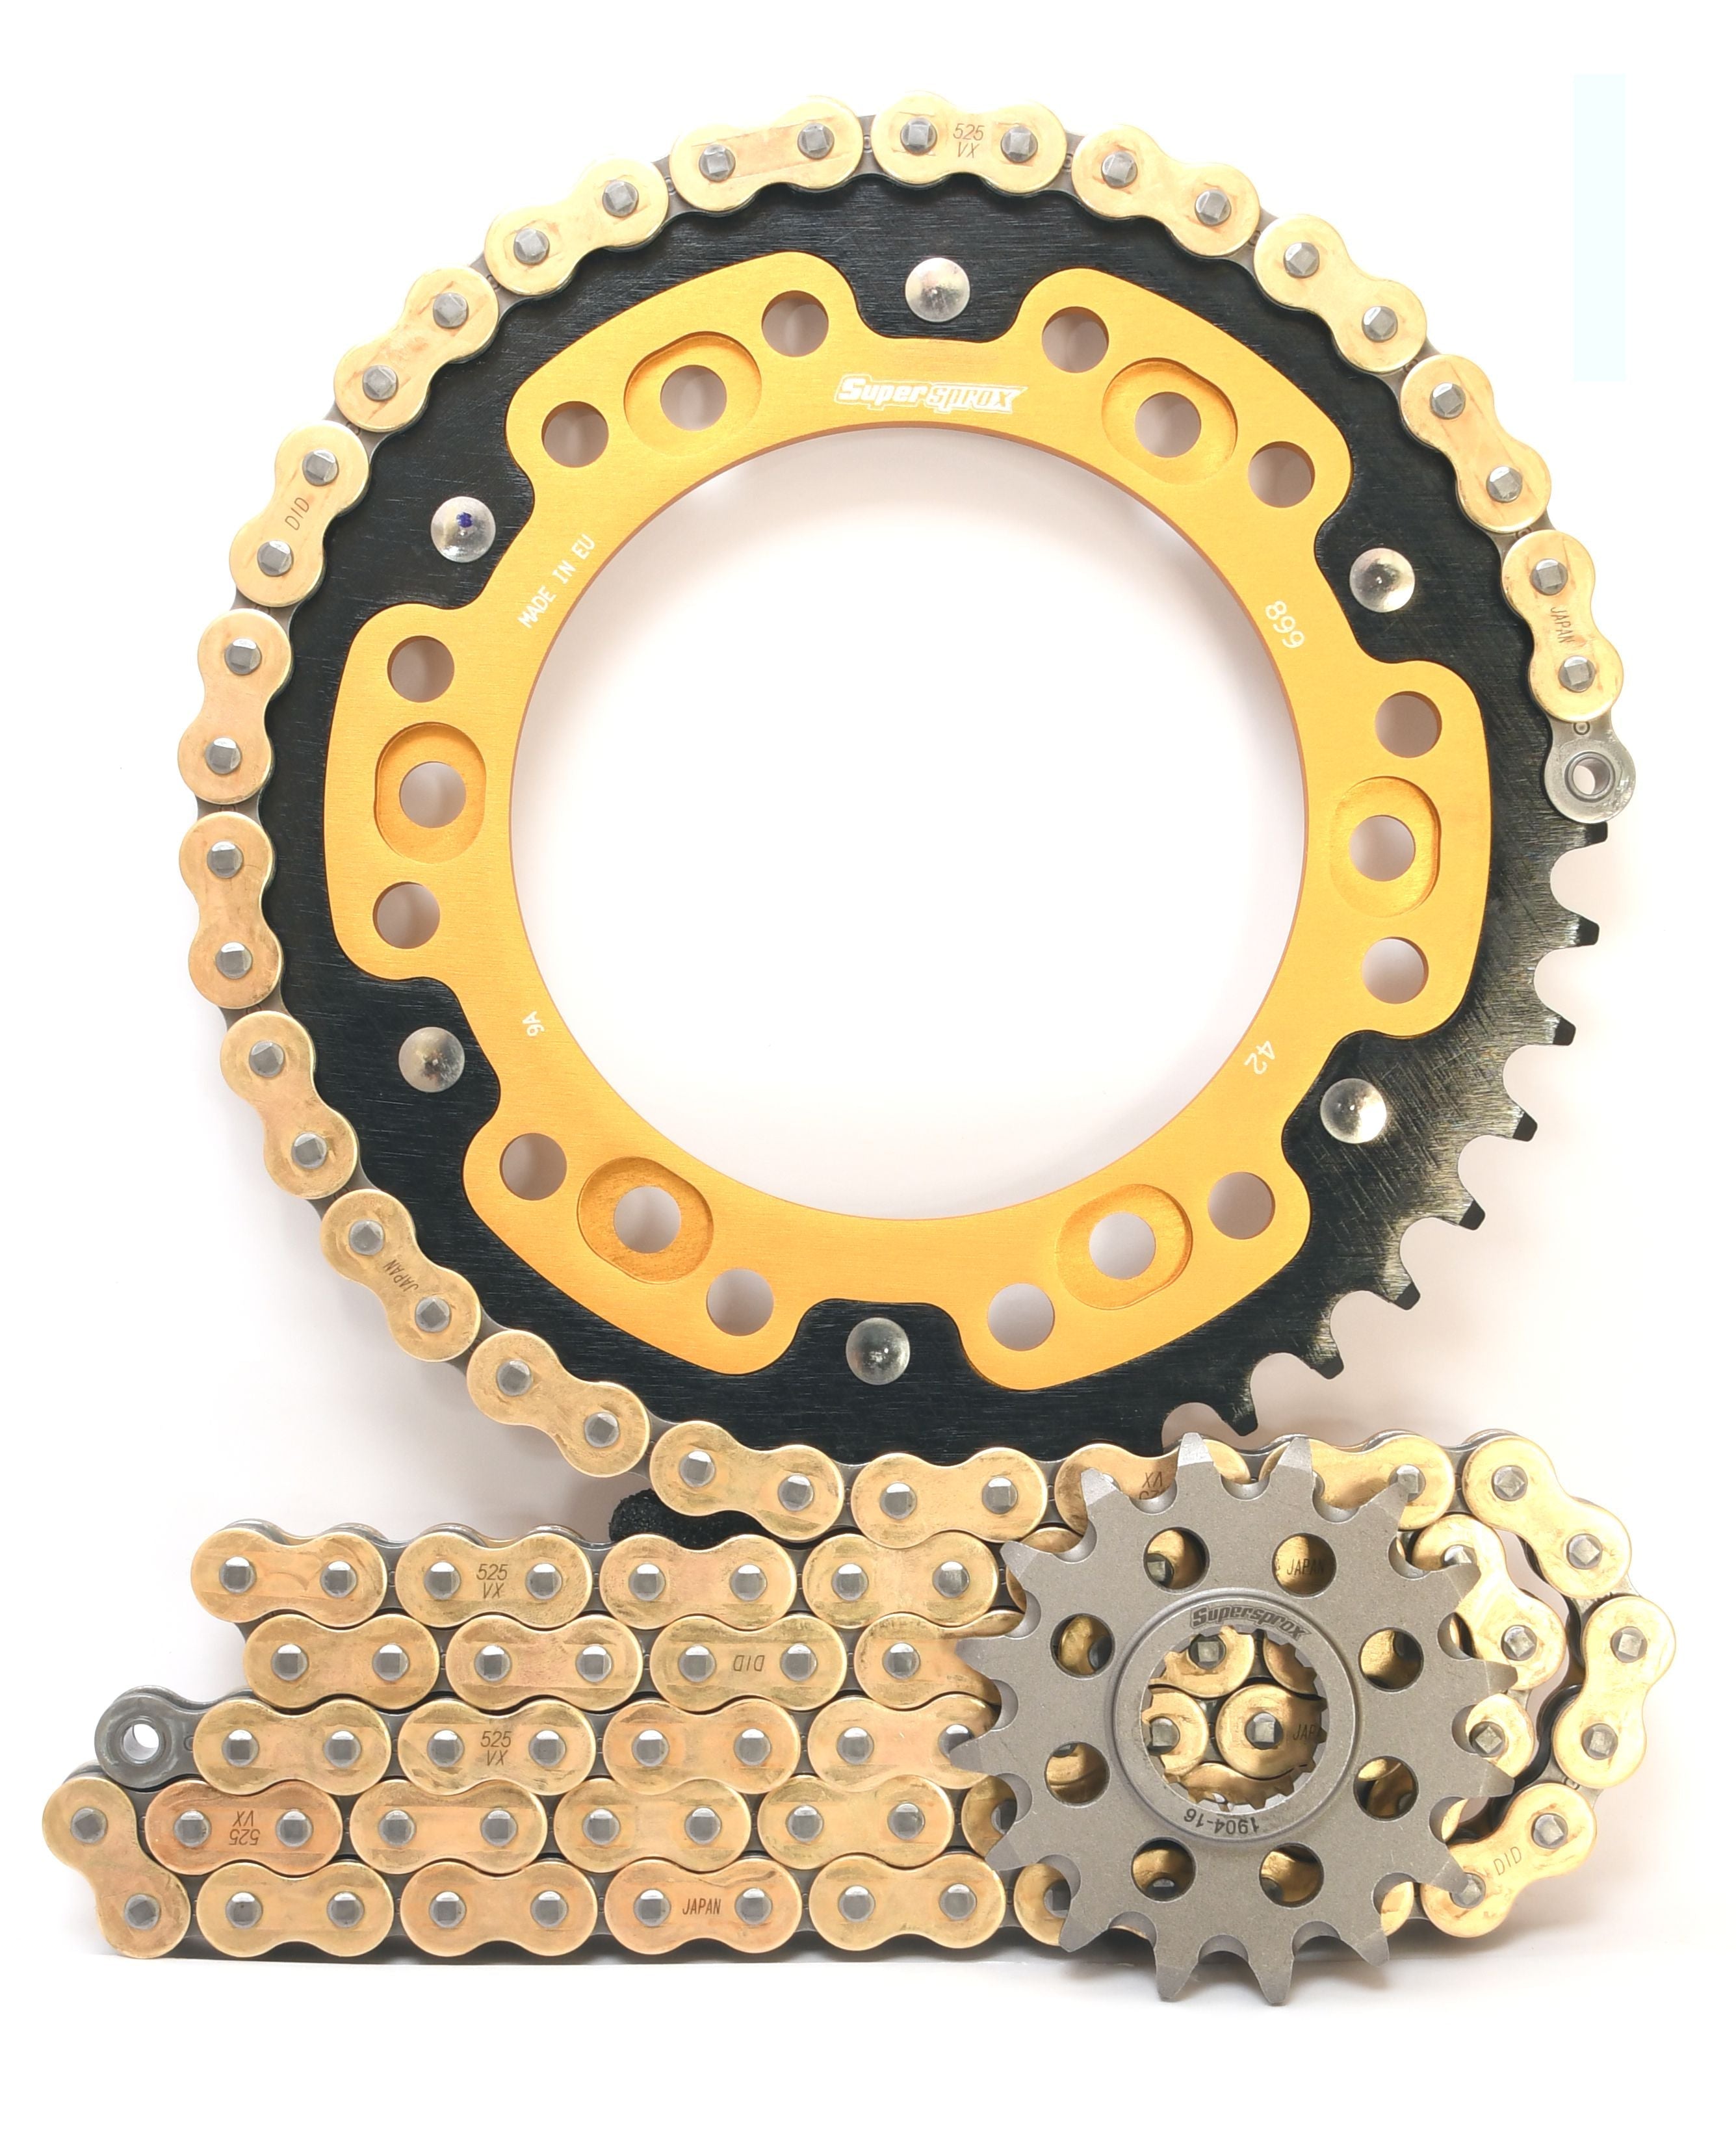 Supersprox Chain & Sprocket Kit for Aprilia RSV4 1000 R & Factory 2009-2011 - Standard Gearing